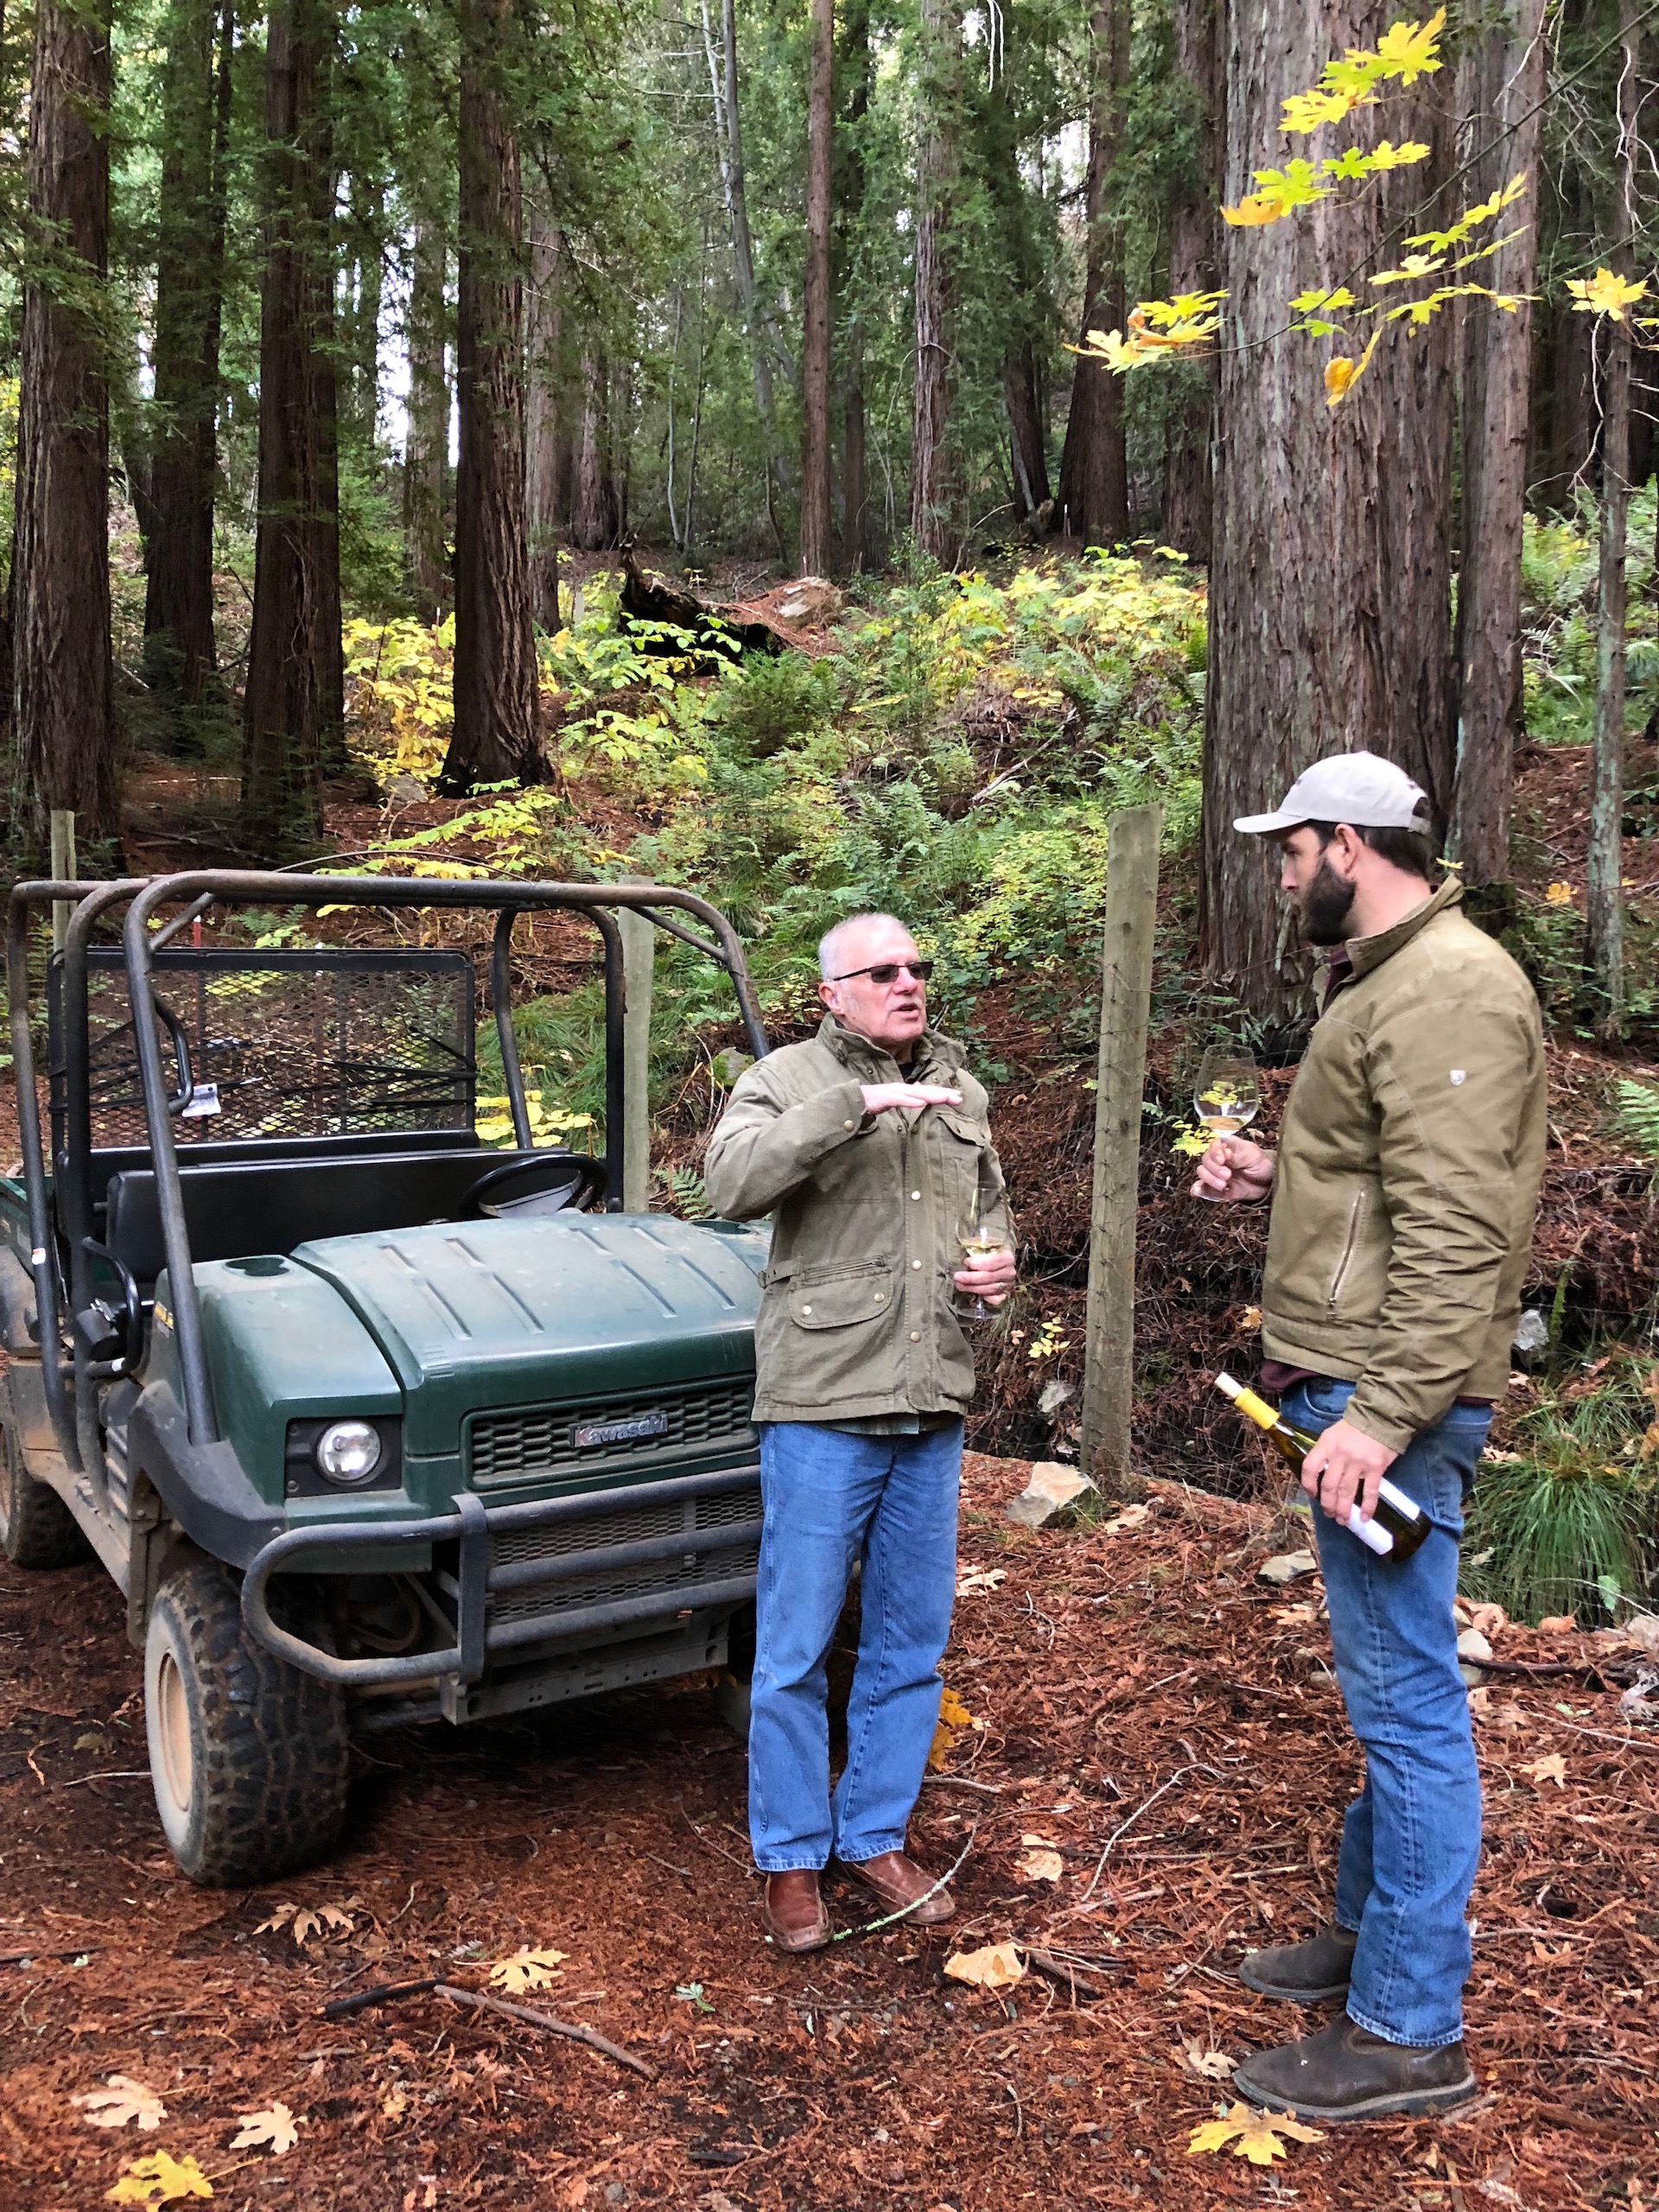 John and Smith-Madrone Vineyard & Winery’s Assistant Winemaker Sam Smith discuss wine and off-road vehicles in the redwood forests of Spring Mountain